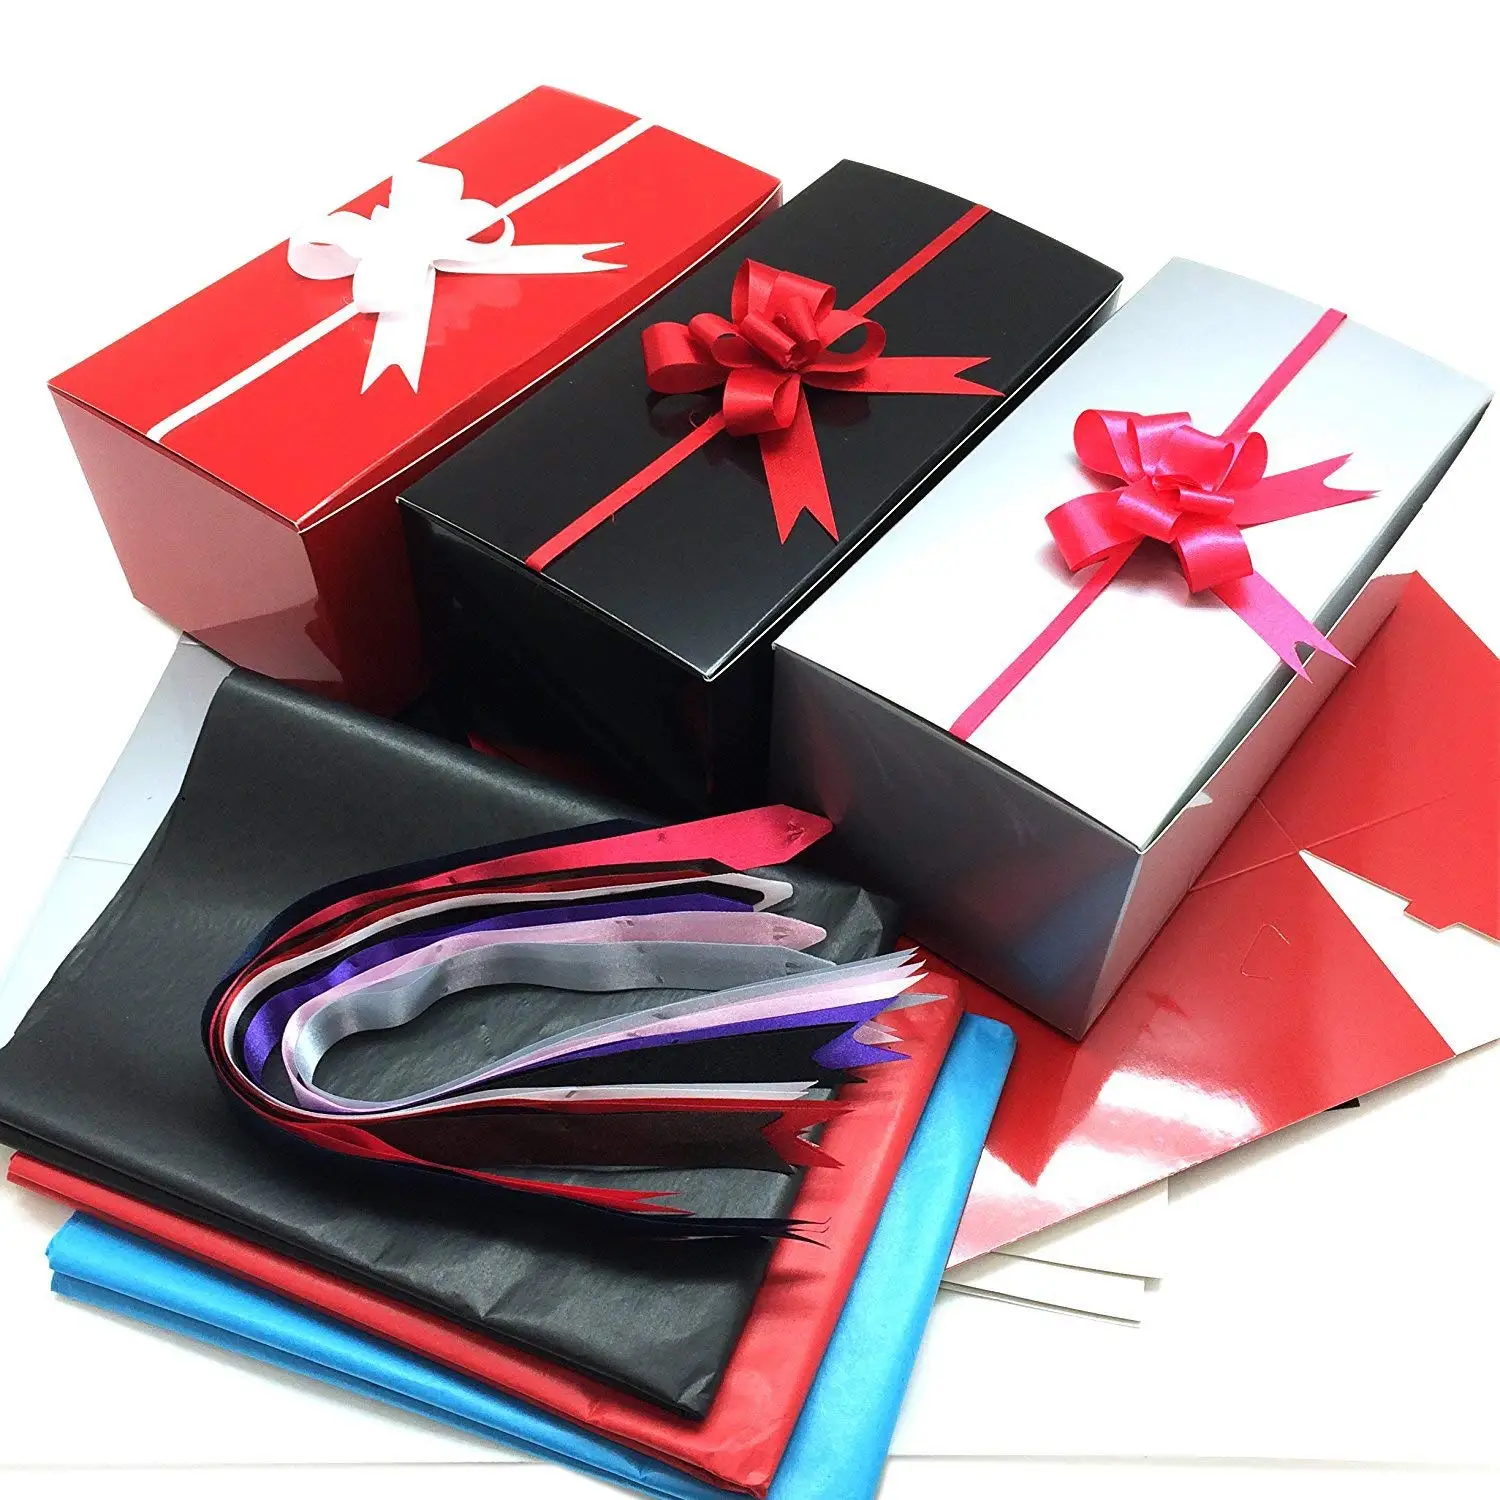 Cheap Plastic Gift Boxes Find Plastic Gift Boxes Deals On Line At